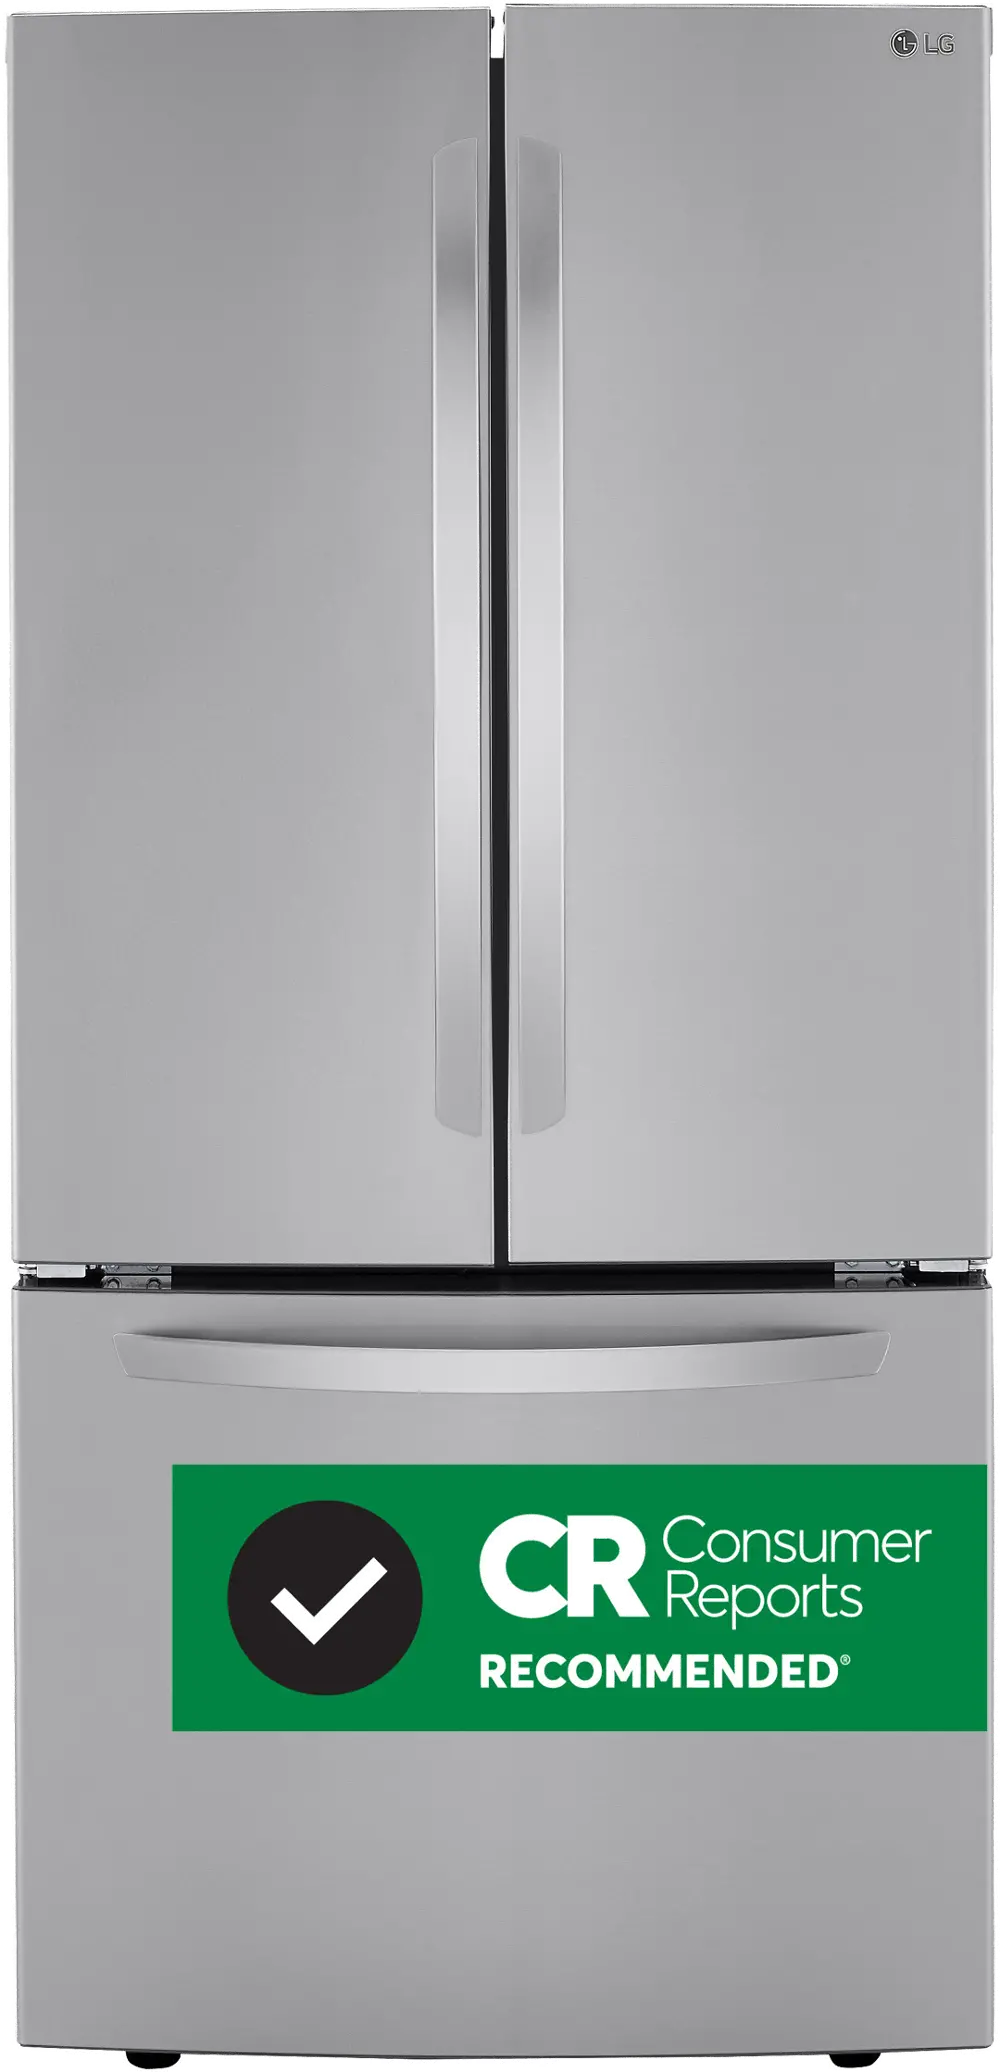 LRFCS25D3S LG 25.2 cu ft French Door Refrigerator - 33 W Stainless Steel-1